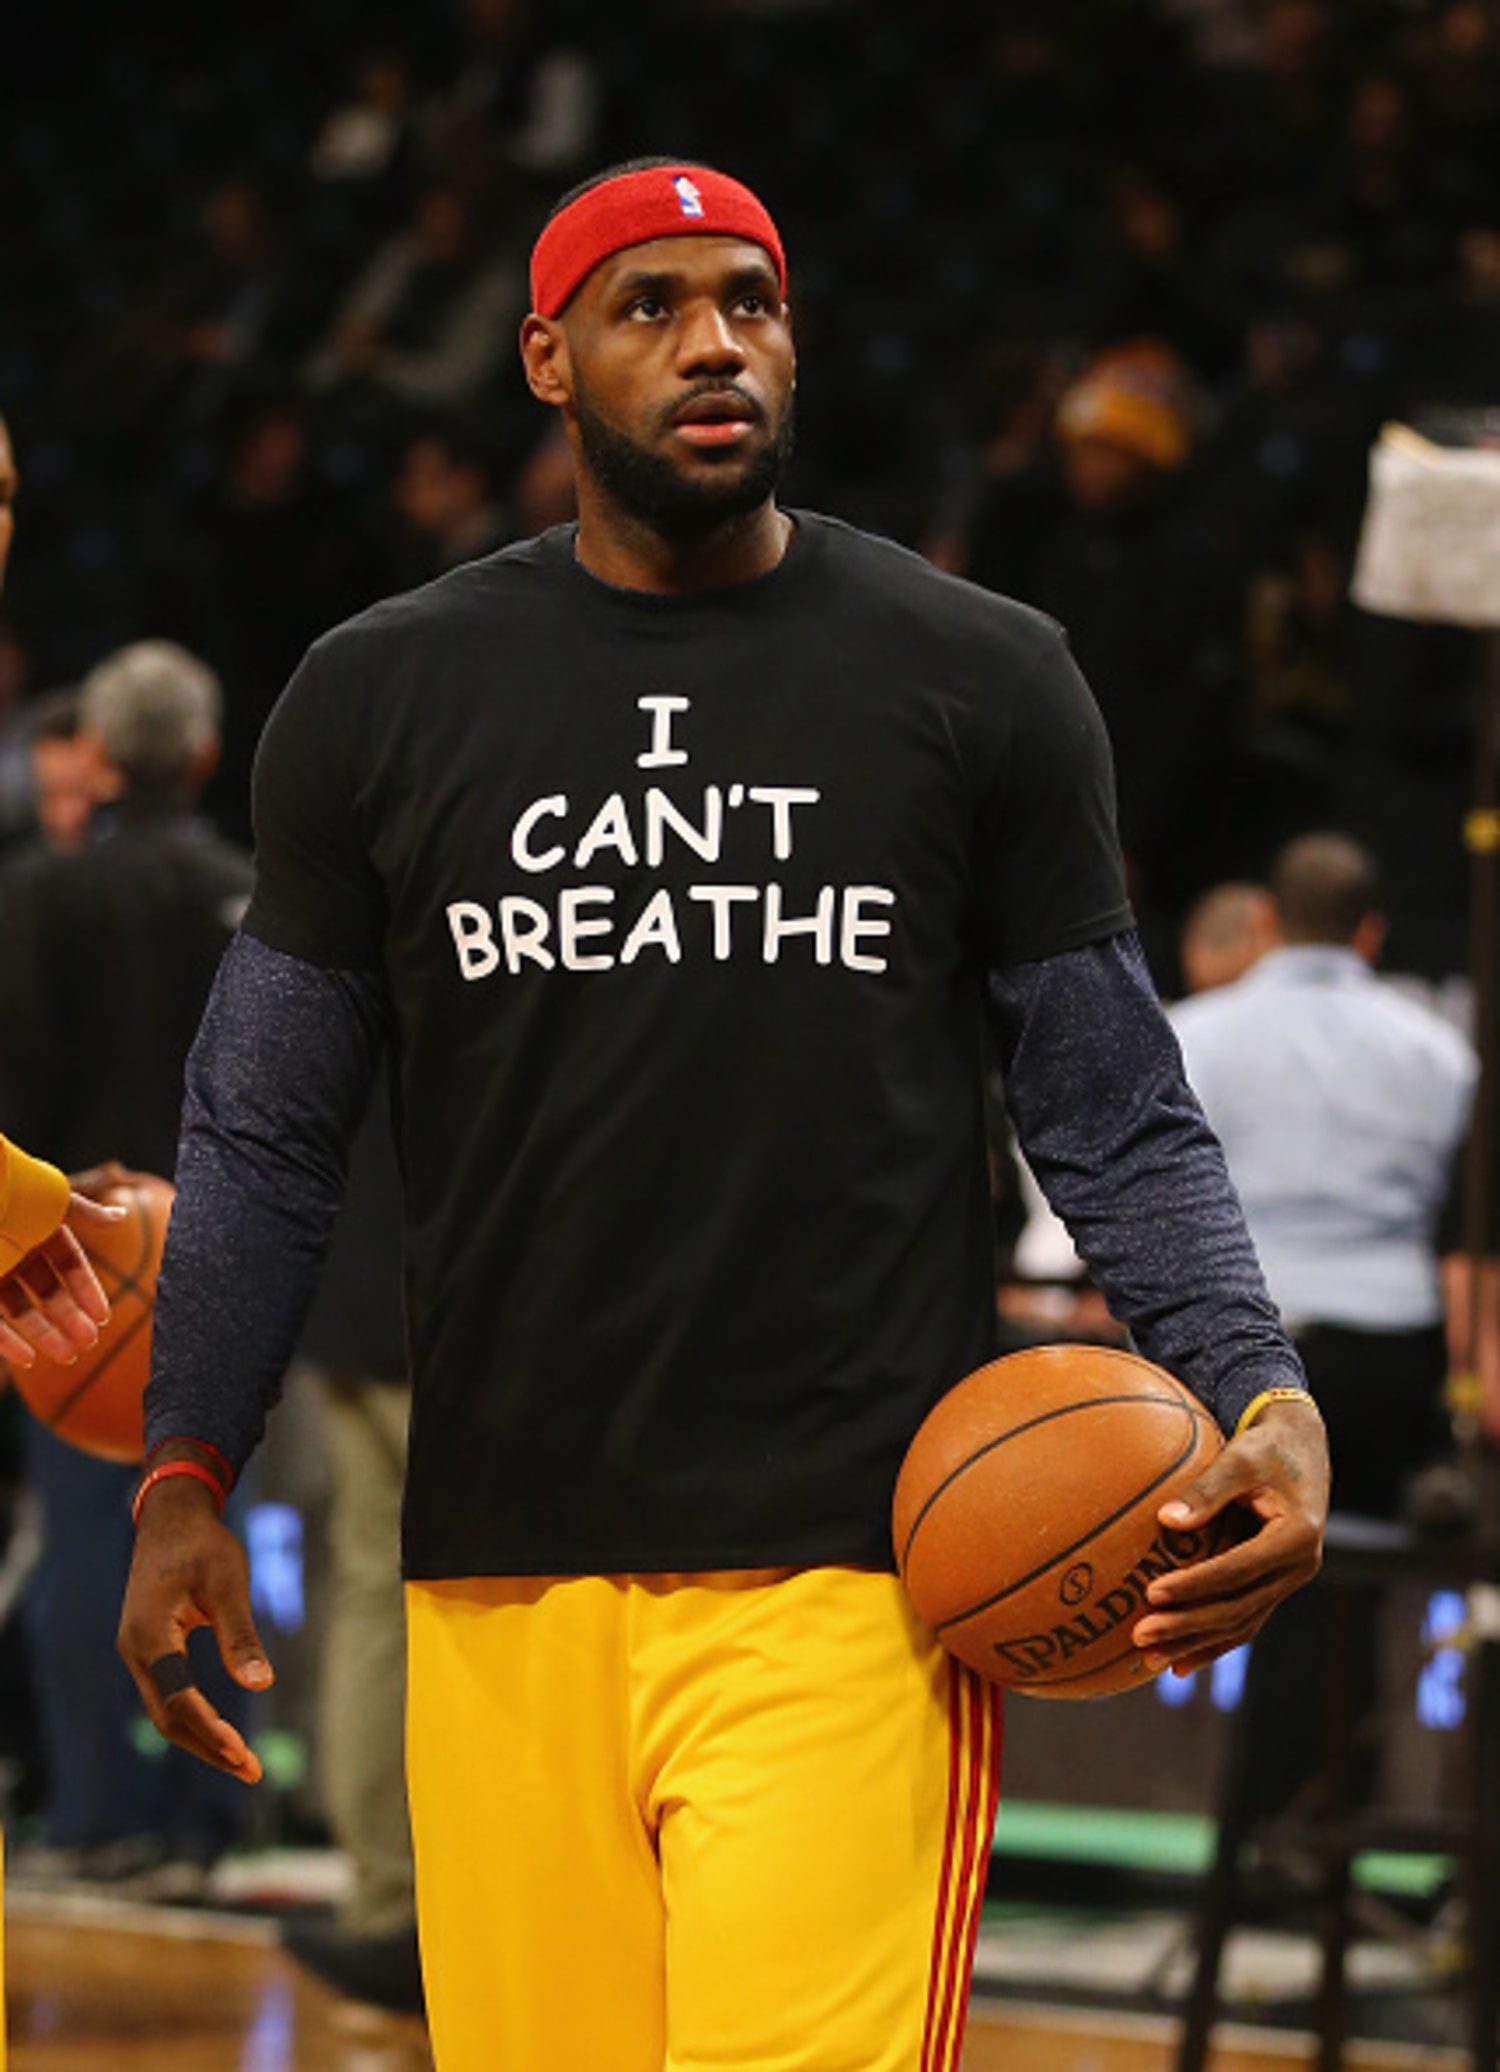 LeBron James, Other NBA Players Wear I Can't Breathe Shirts Before Game